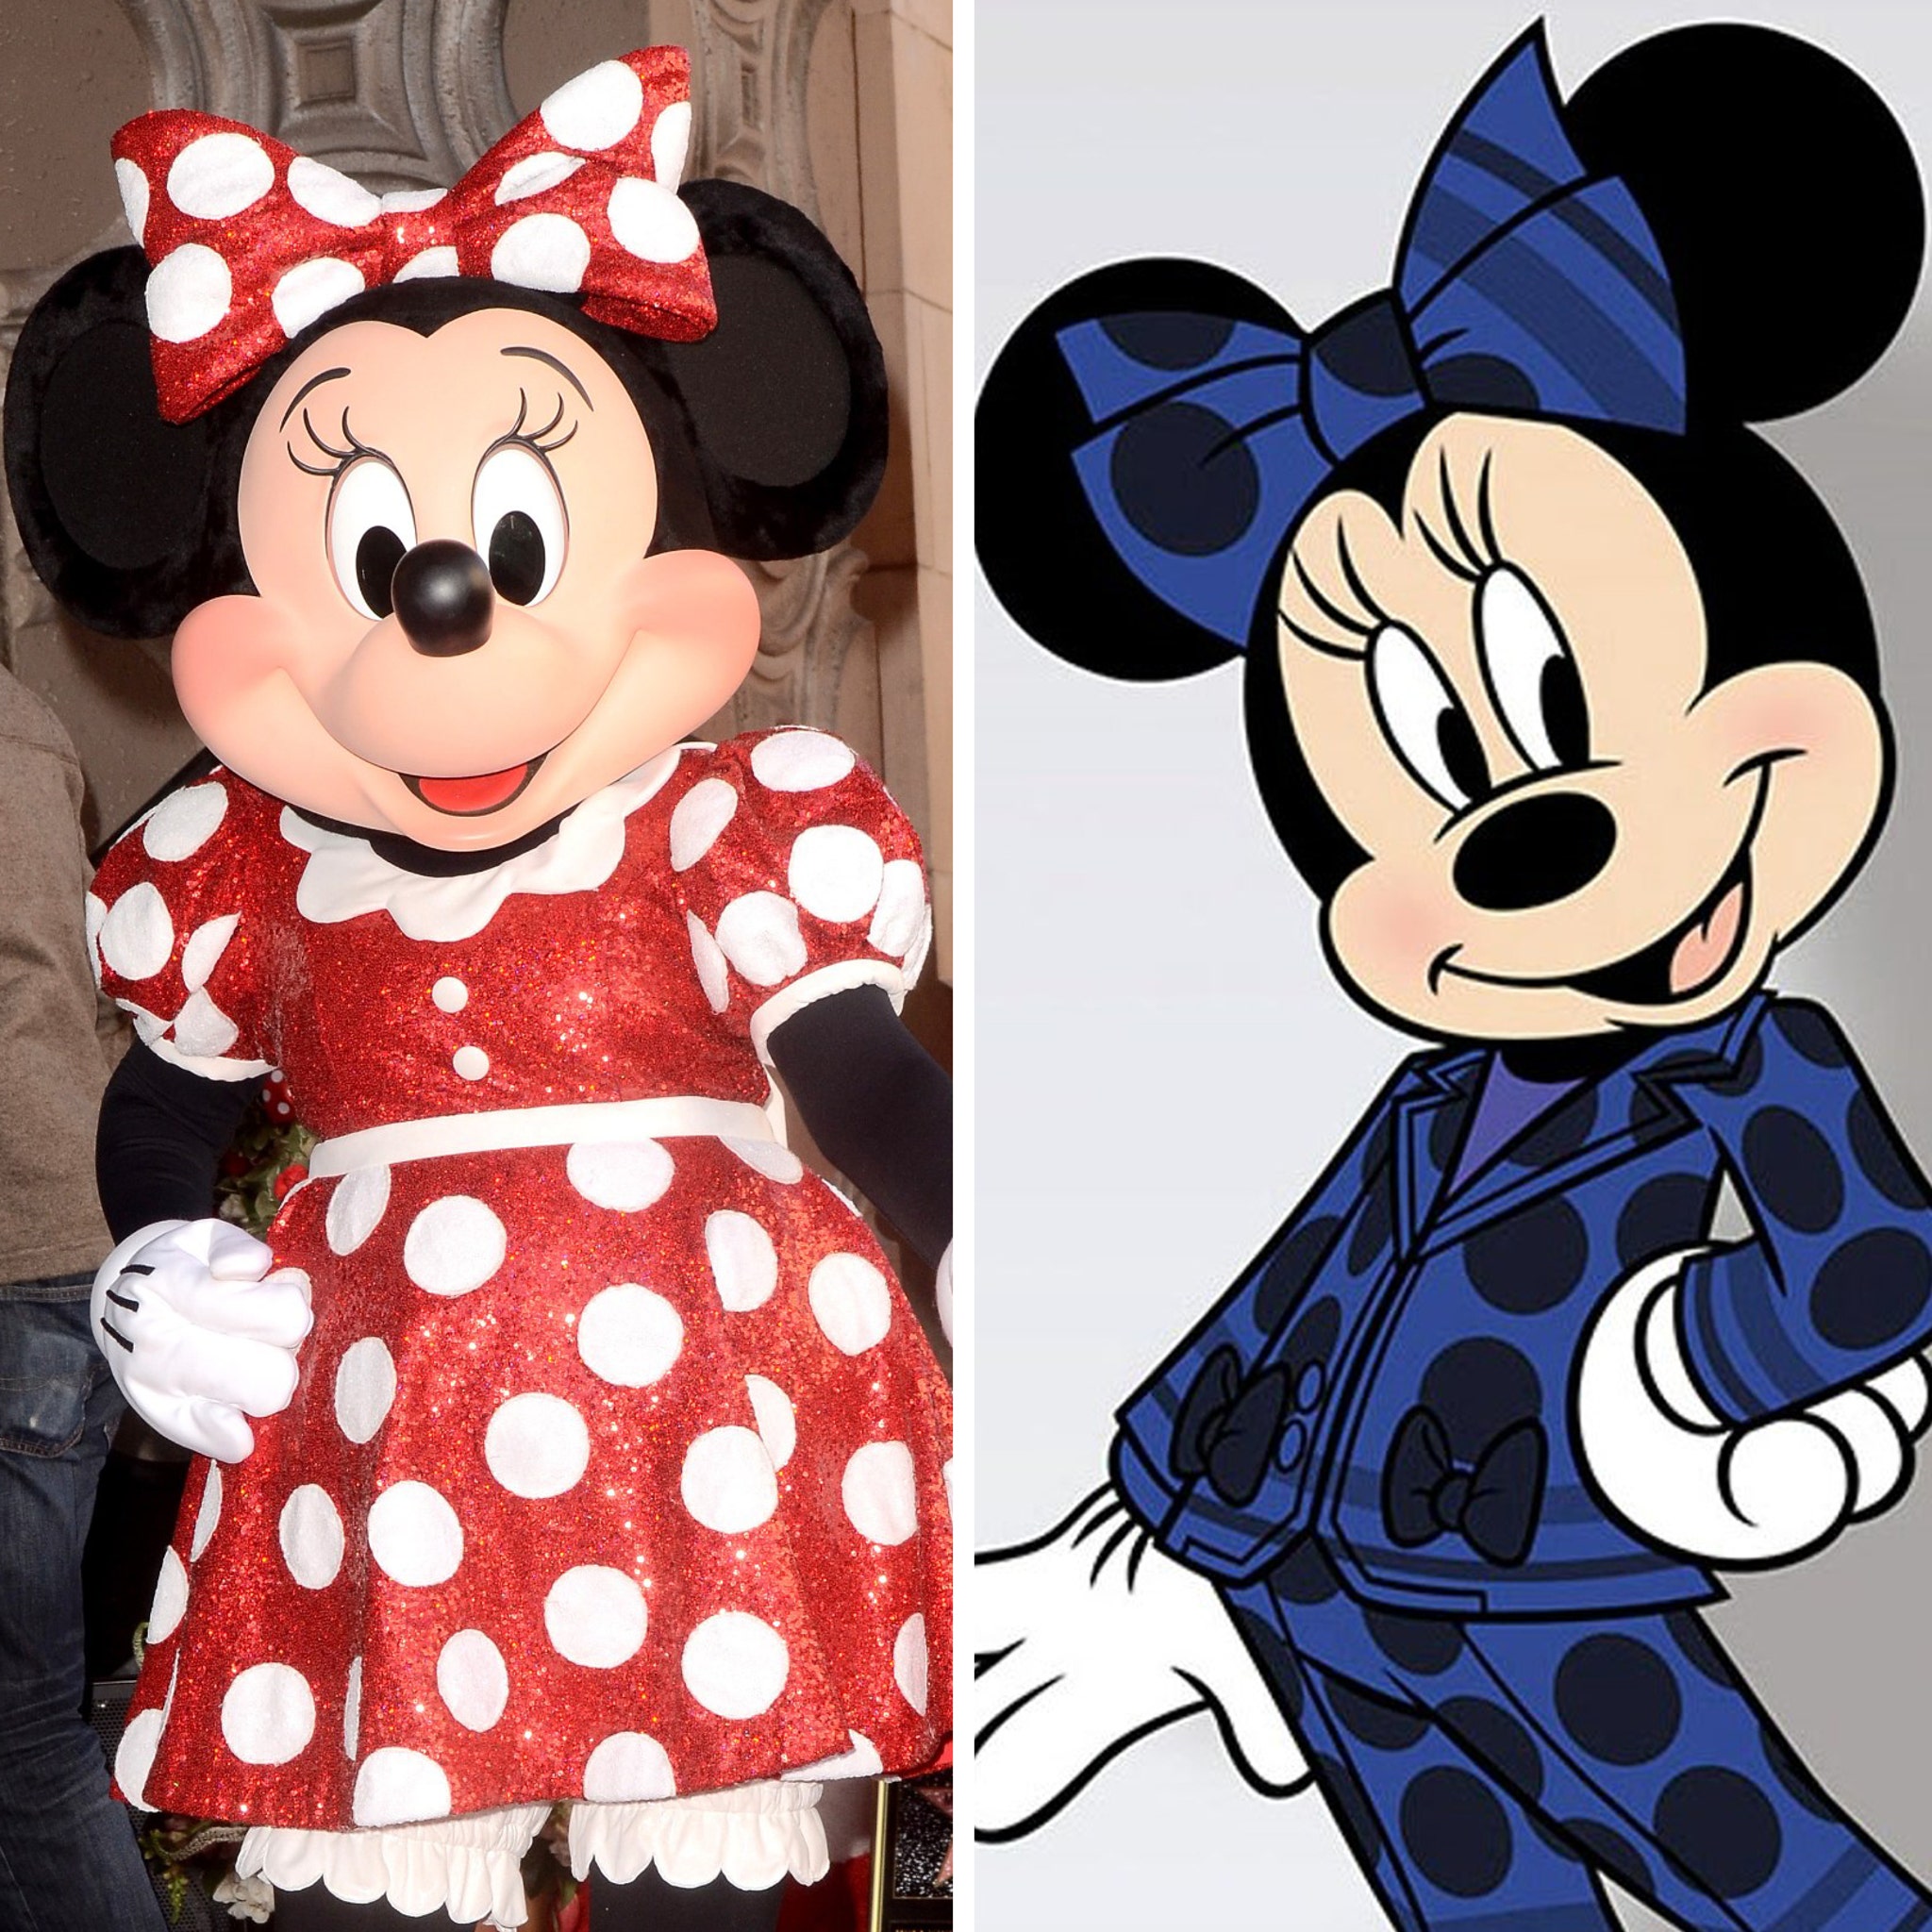 Minnie Mouse To Wear Pantsuit for Disneyland Paris' 30th Anniversary